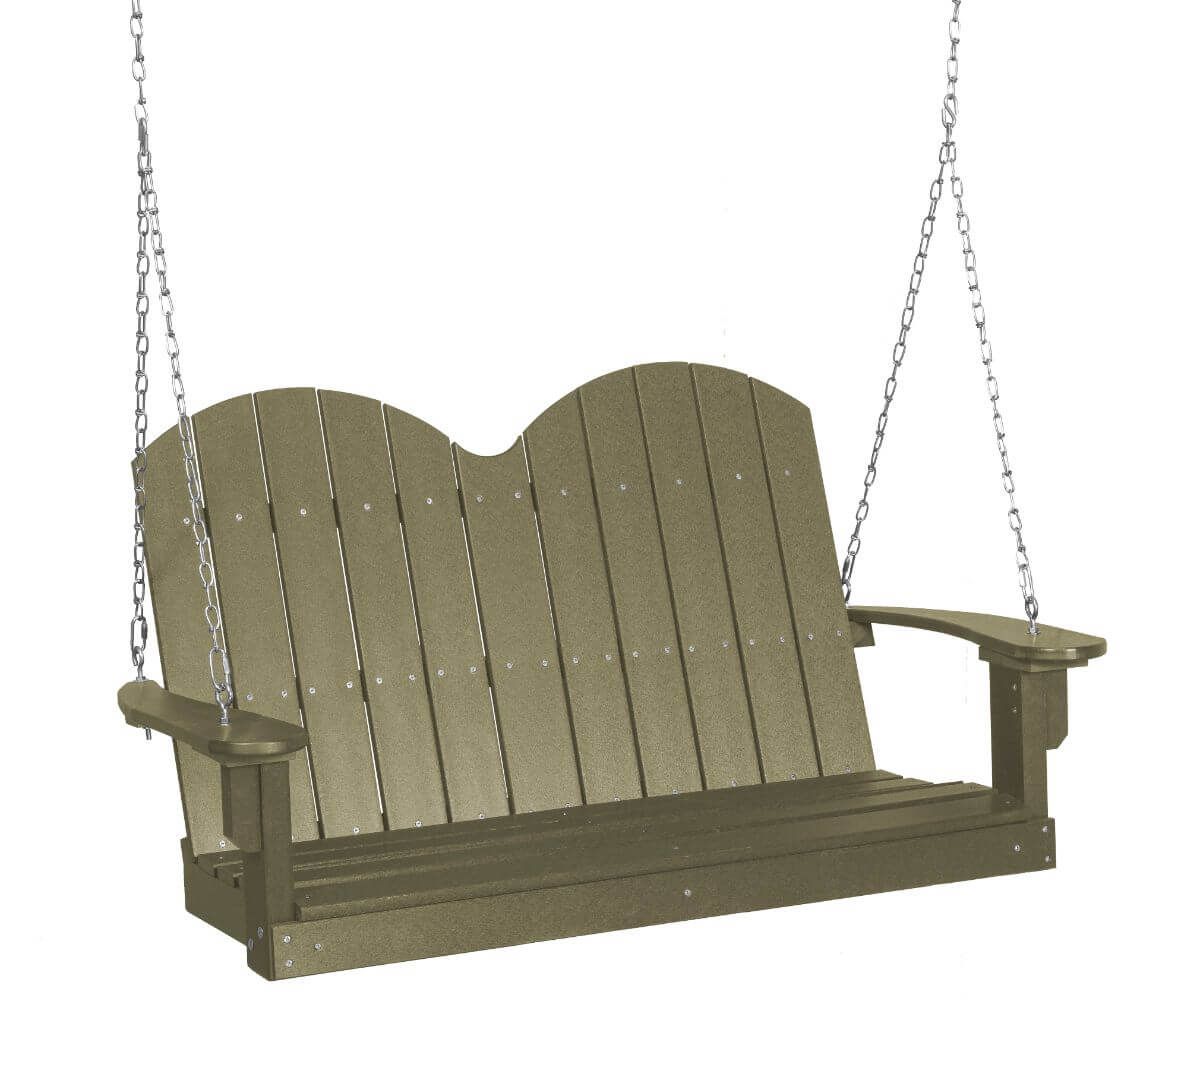 Olive Green Bay Outdoor Swing